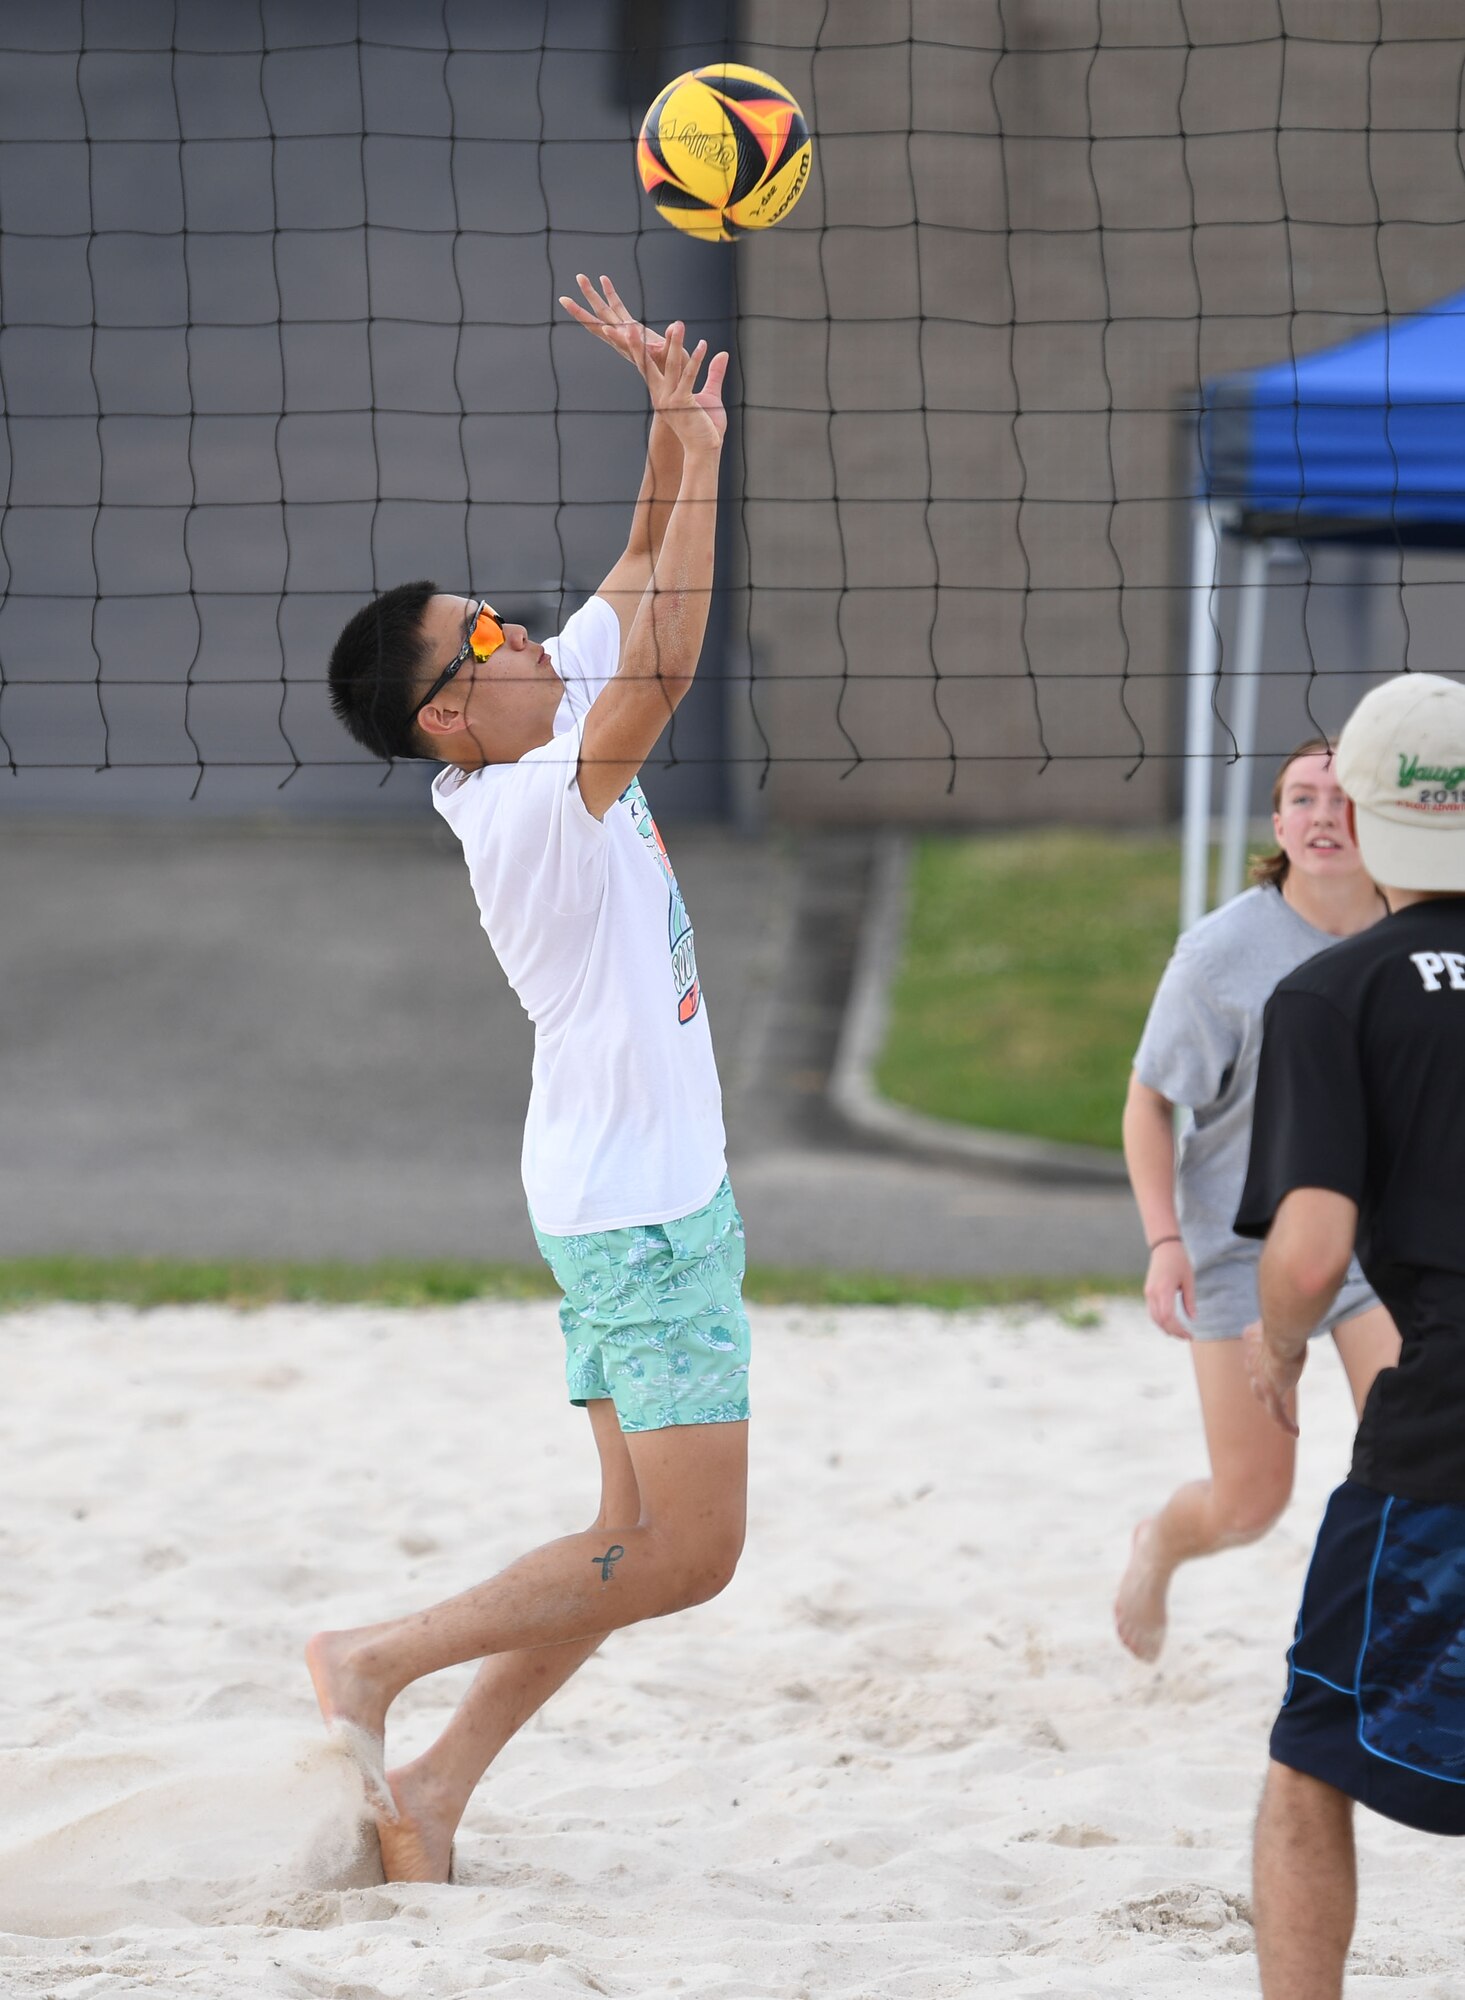 U.S. Air Force Airman Andre Phamhoang, 336th Training Squadron student, hits a volleyball during the Sexual Assault and Awareness Prevention Month volleyball tournament at Keesler Air Force Base, Mississippi, April 29, 2022. More than 20 teams competed in the event, which was held in acknowledgment of Sexual Assault and Awareness Prevention Month throughout April. (U.S. Air Force photo by Kemberly Groue)